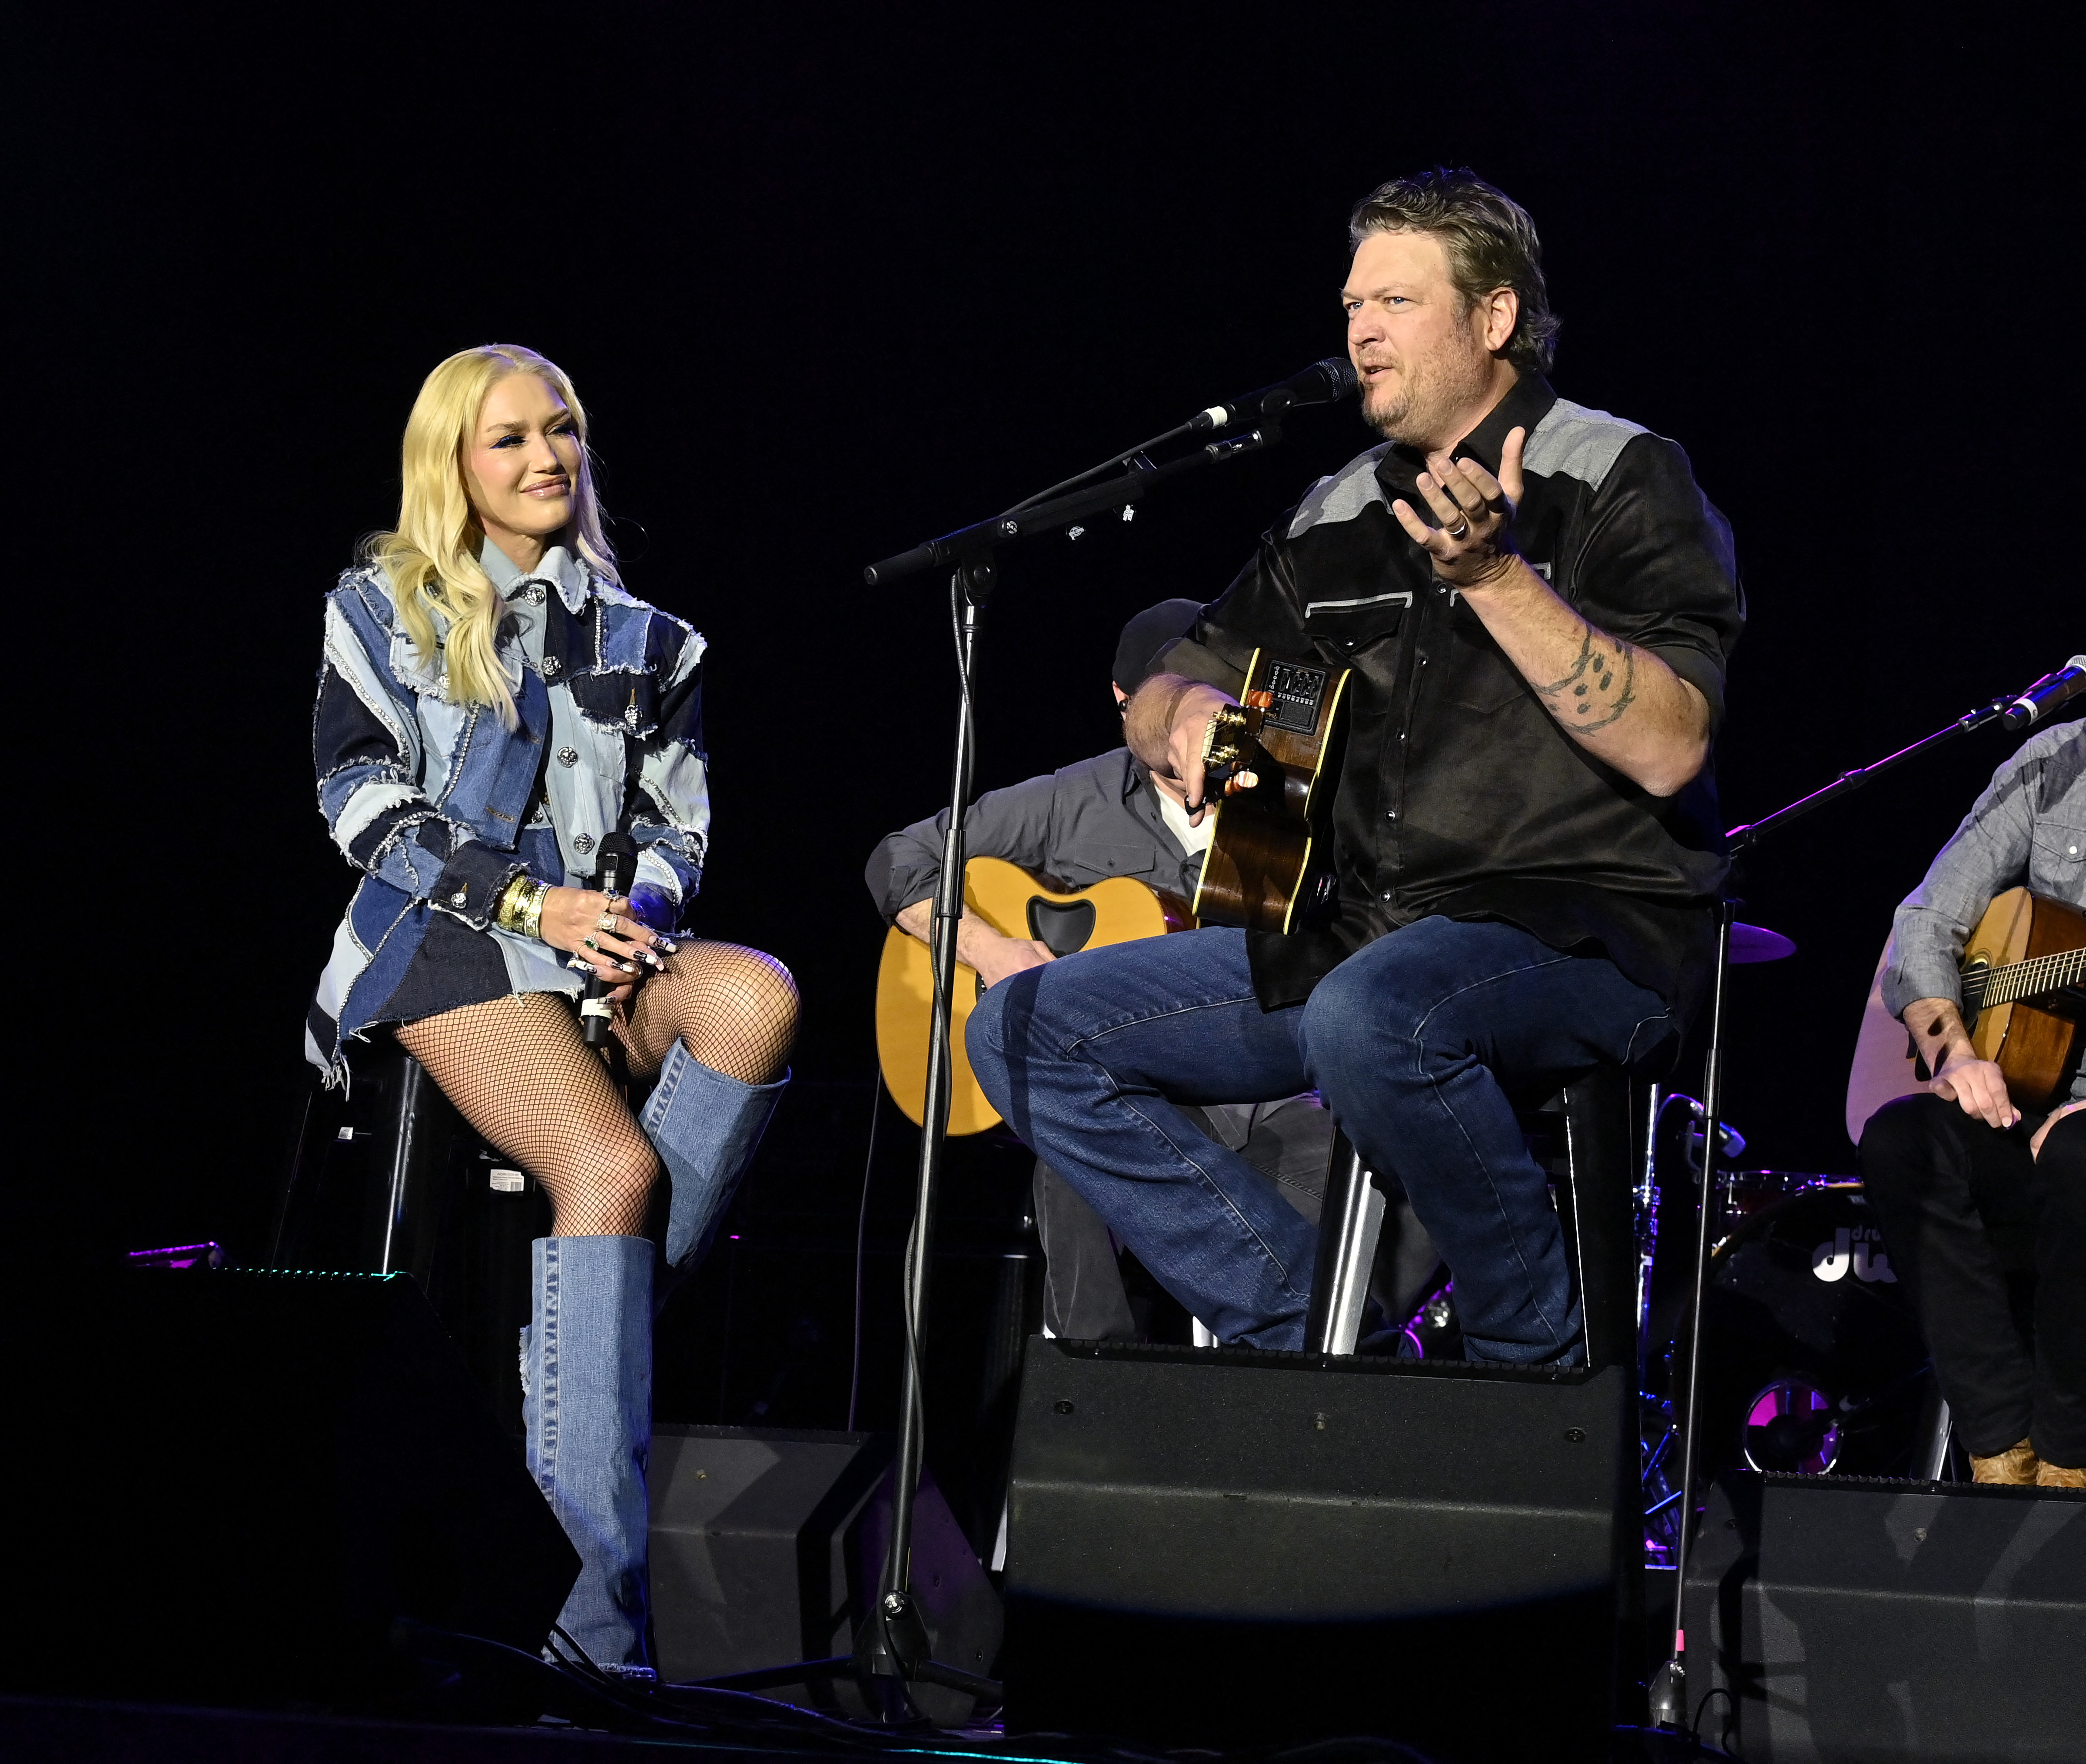 While on tour, Gwen has joined her husband at several shows